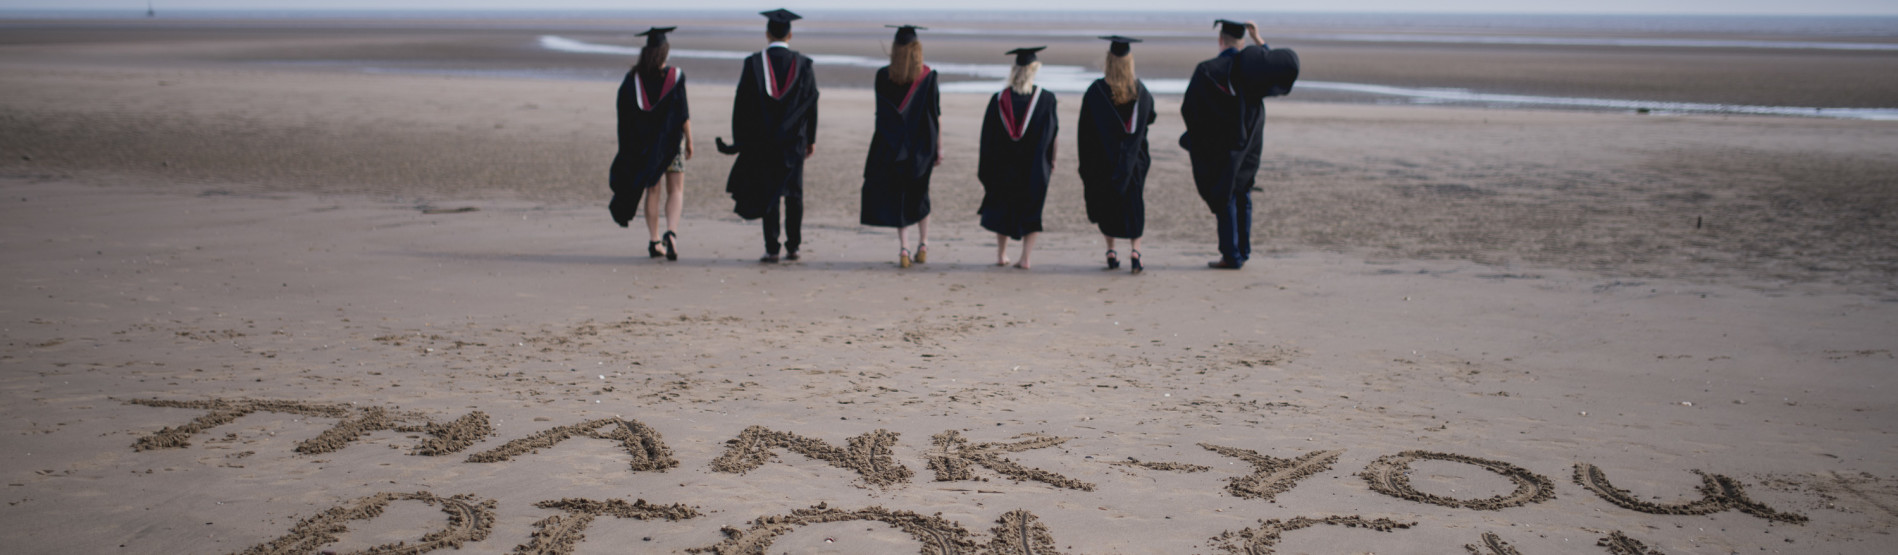 students on the beach at graduation